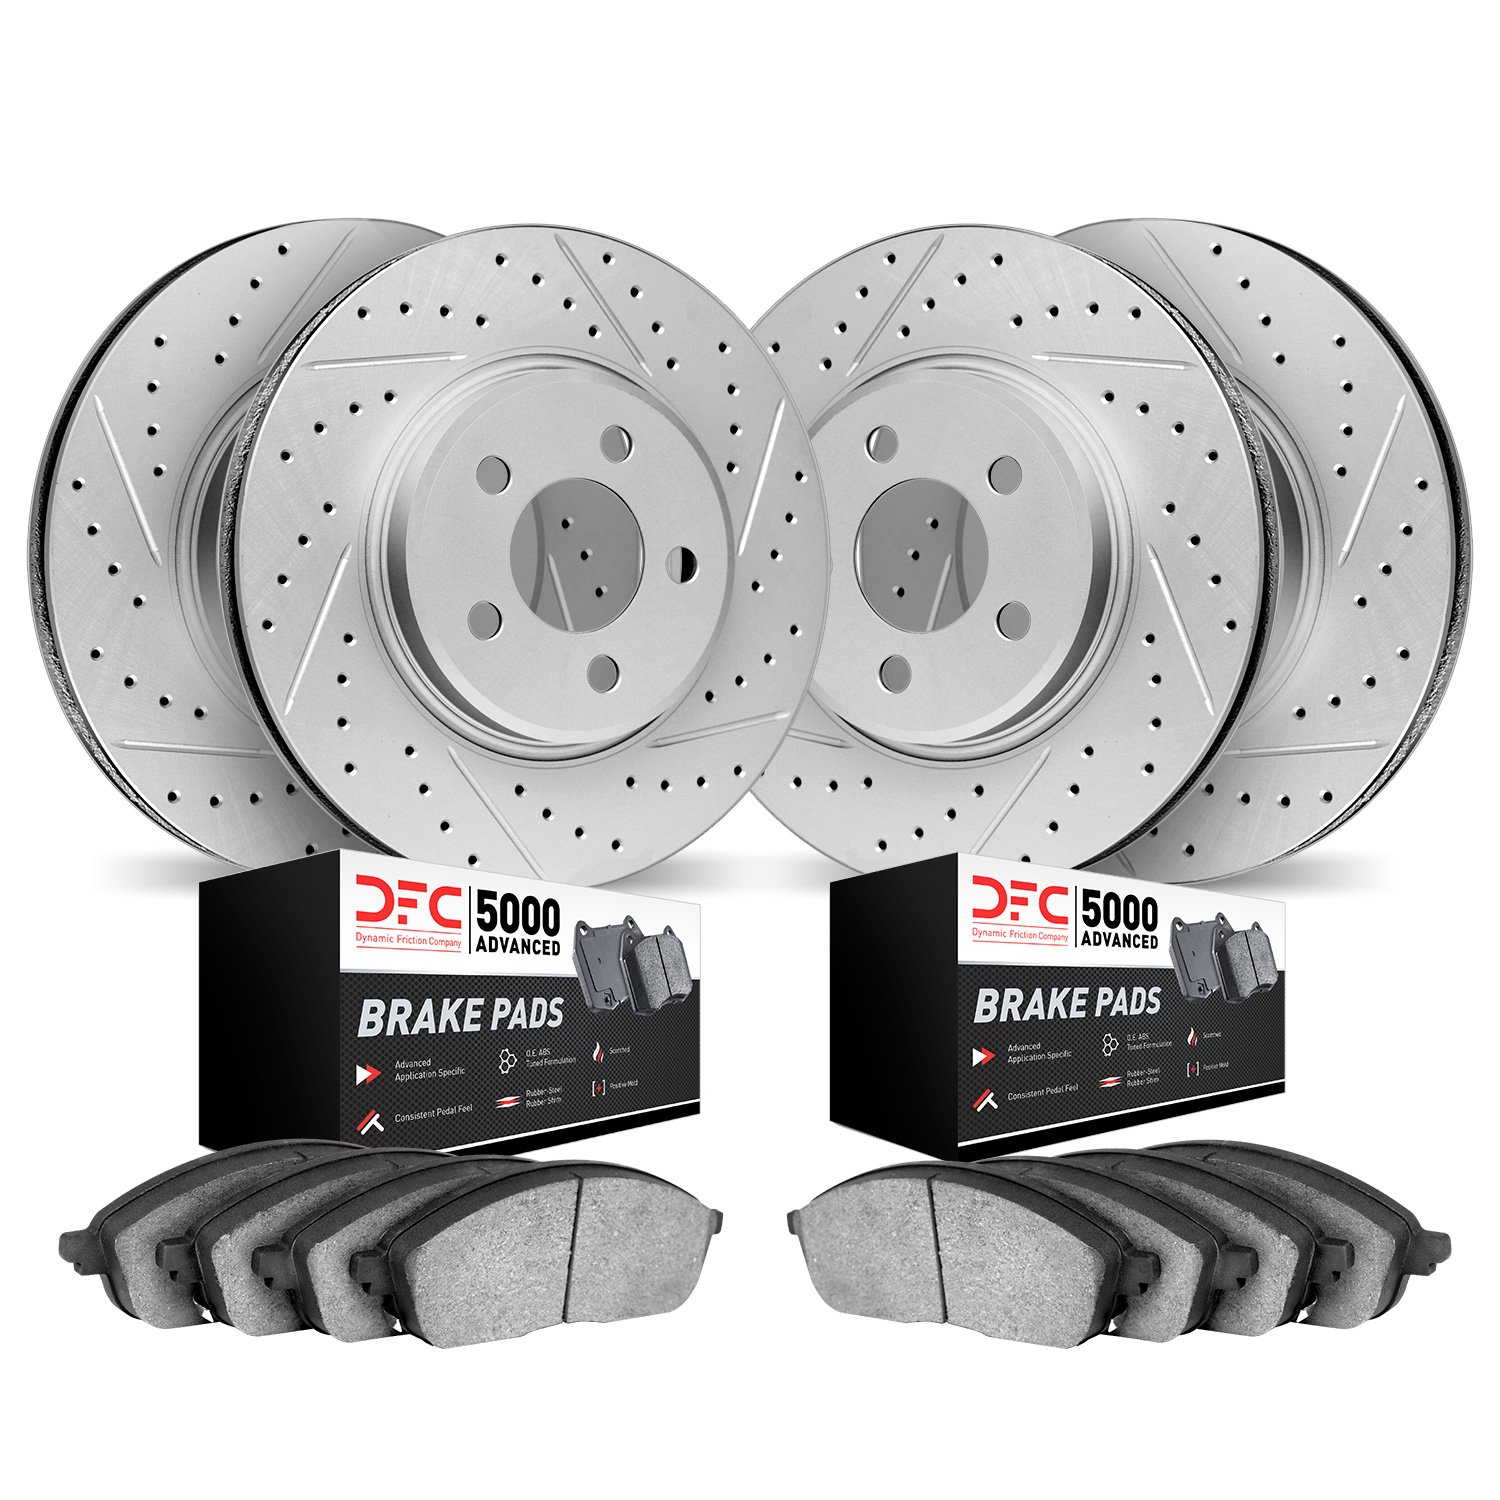 2504-42061 Geoperformance Drilled/Slotted Rotors w/5000 Advanced Brake Pads Kit, Fits Select Mopar, Position: Front and Rear